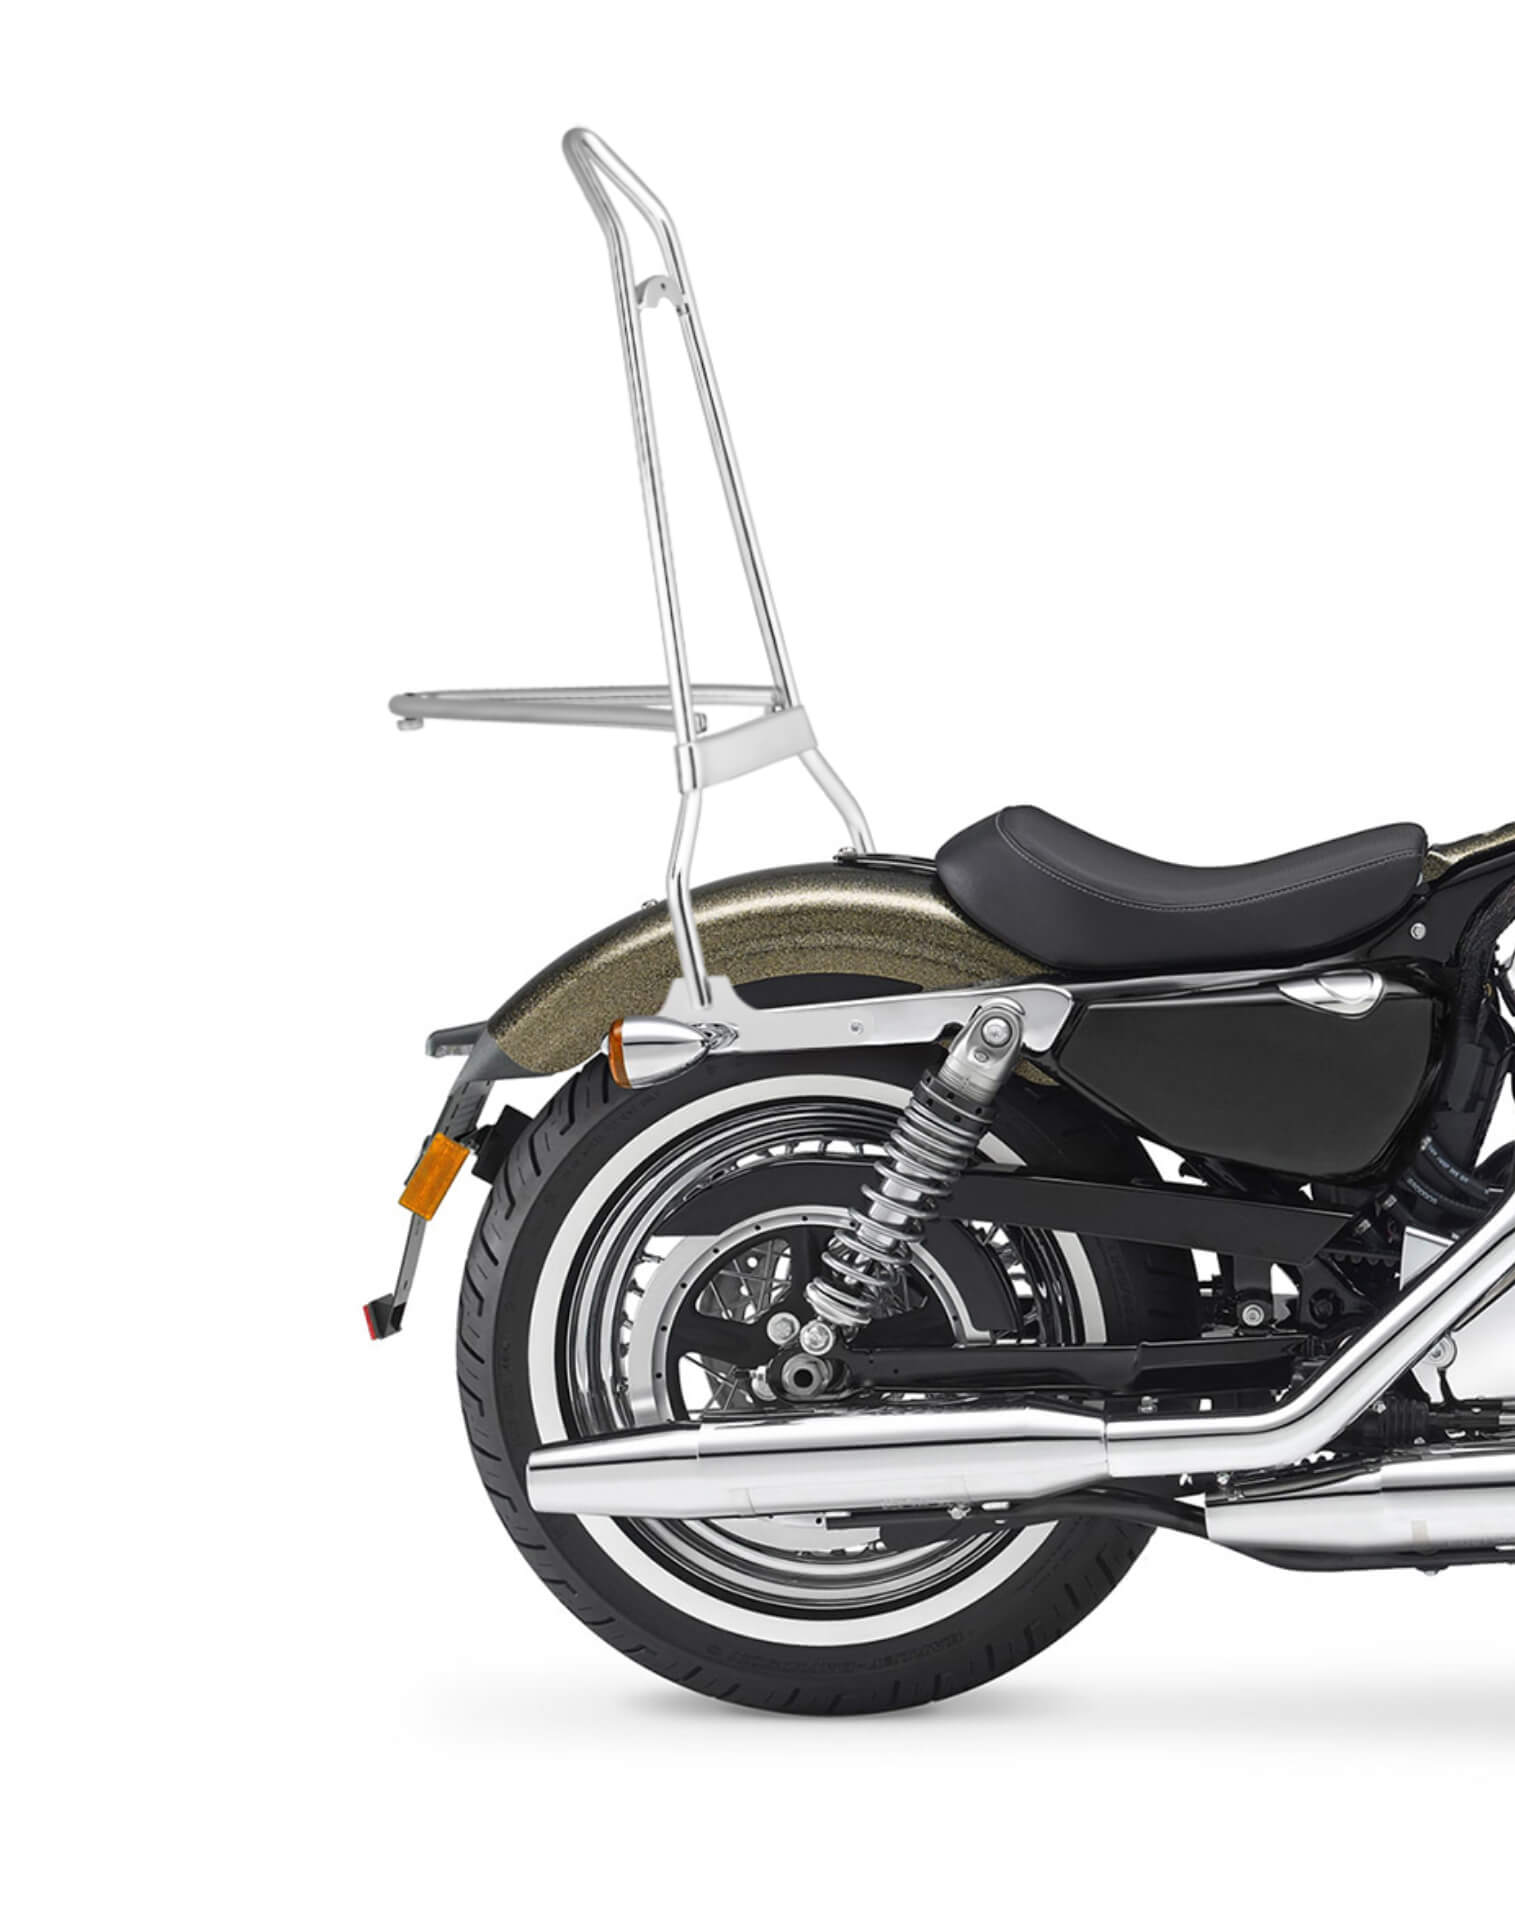 Iron Born Blade 25" Sissy Bar with Foldable Luggage Rack for Harley Sportster Seventy Two Chrome Close Up View